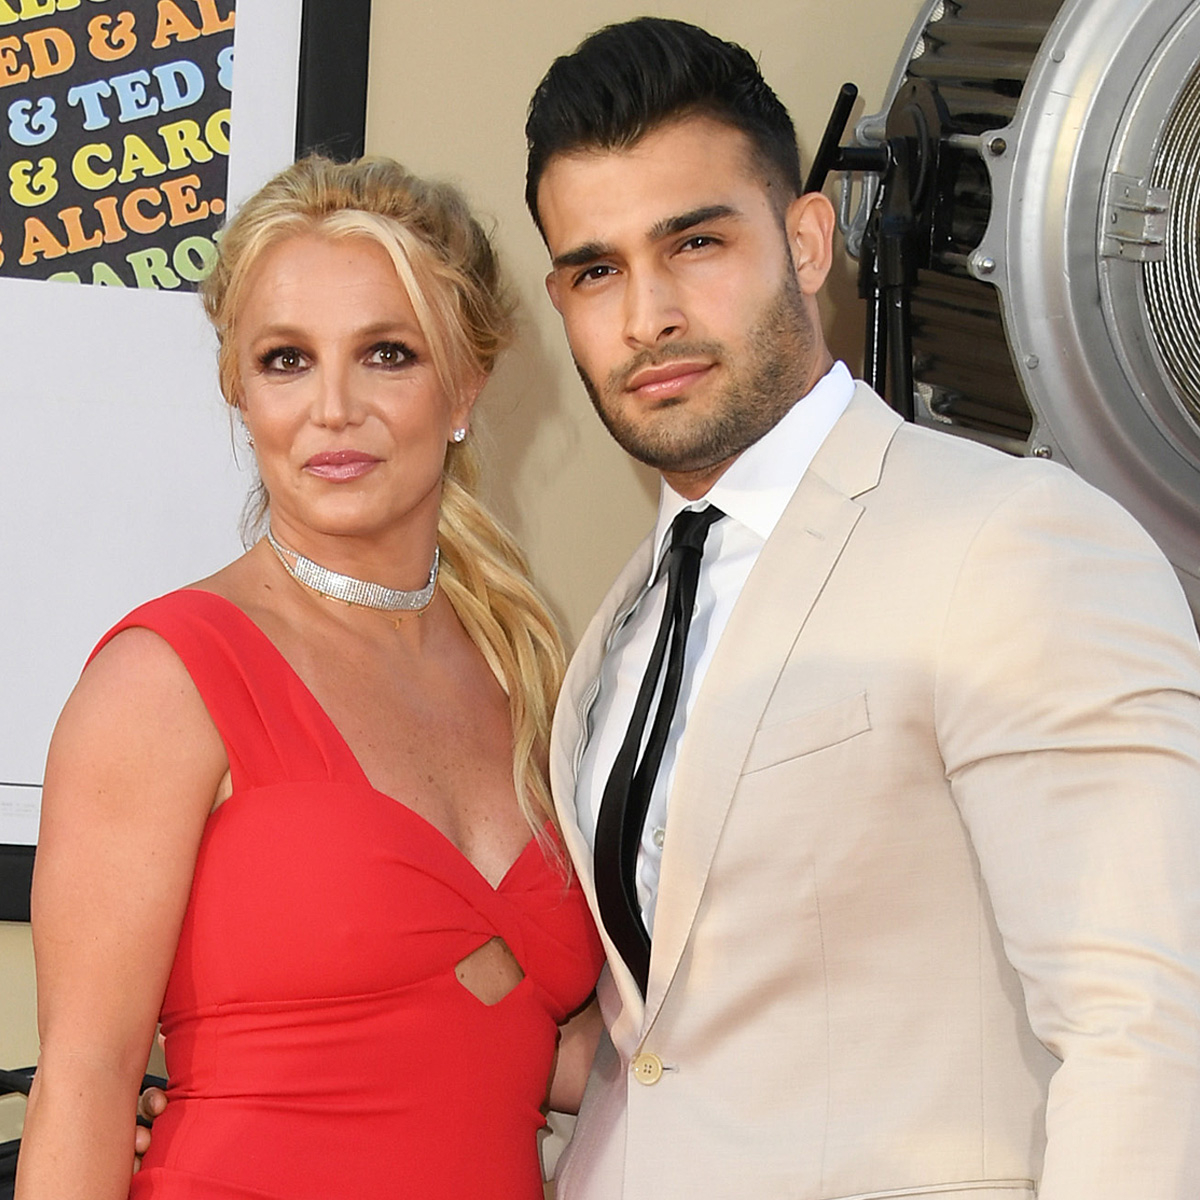 Britney Spears and Sam Asghari Share They Have “Lost Our Miracle Baby”